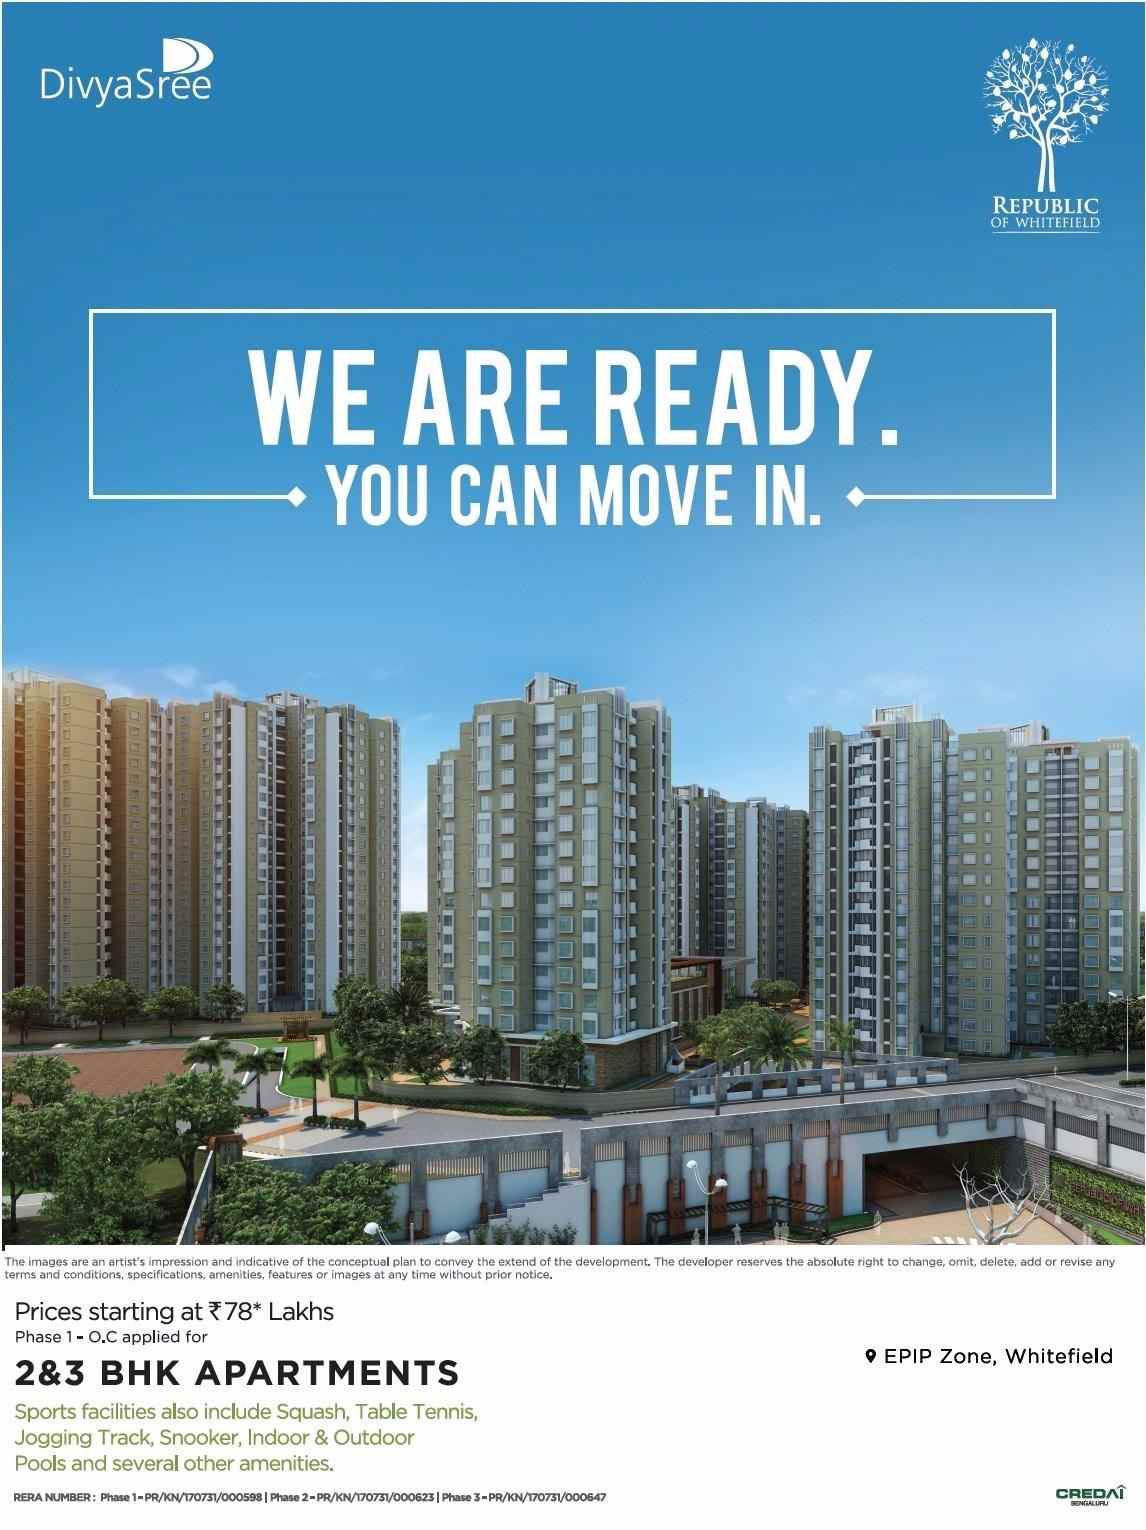 Divyasree Republic of Whitefield is now ready to move in Bangalore Update